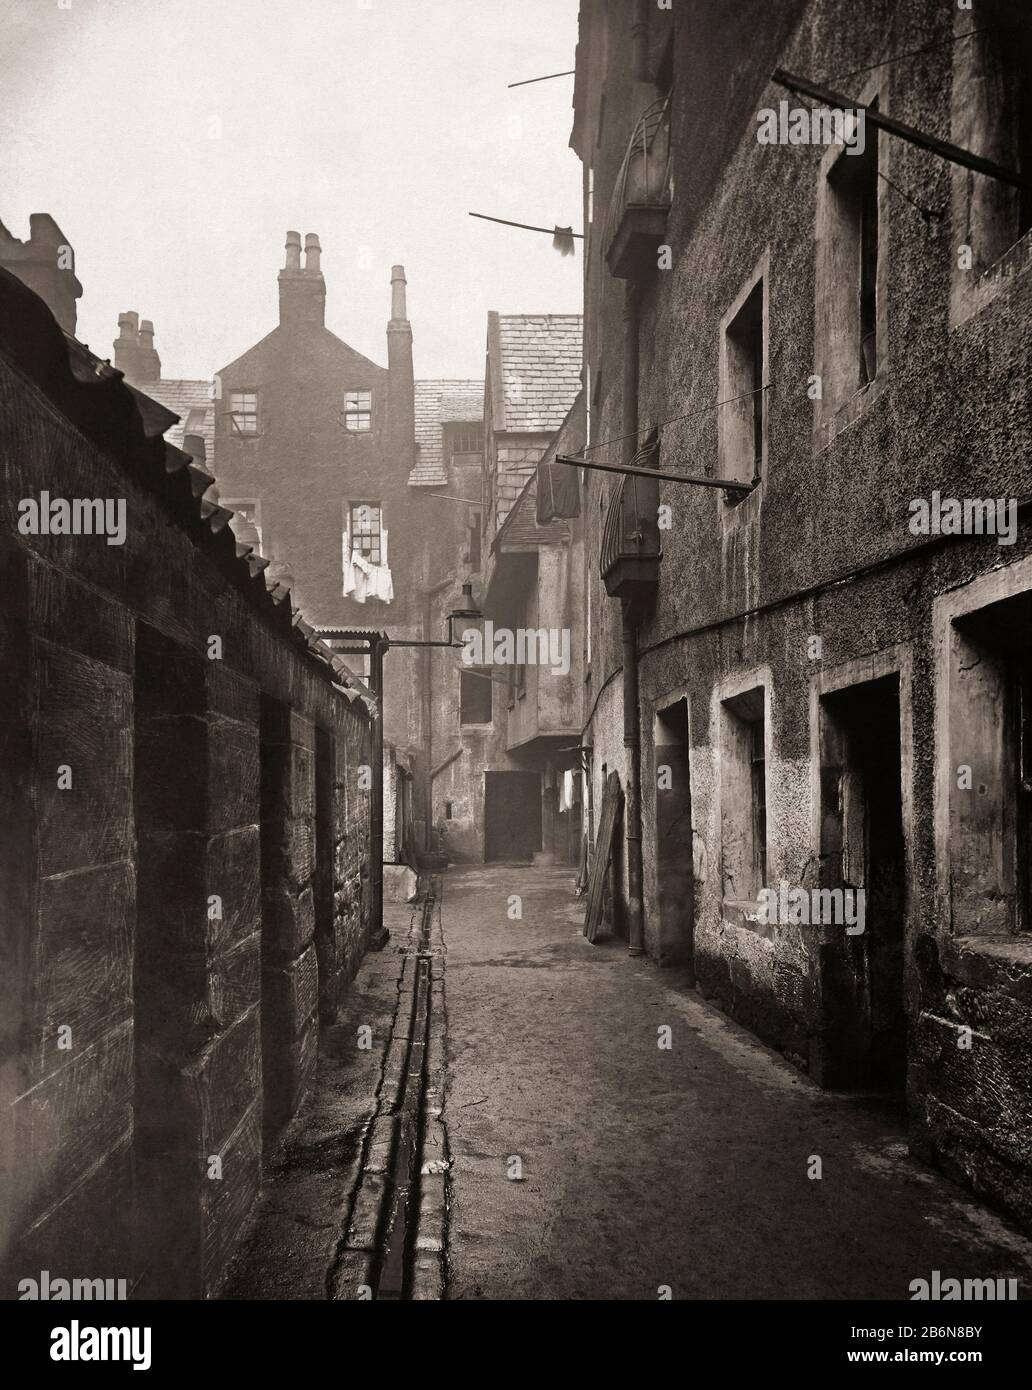 Close, 115 High Street, Glasgow, Scotland in the 1870’s. Photograph from The Old Closes and Streets of Glasgow, by Scottish photographer Thomas Annan 1829-1887. Stock Photo